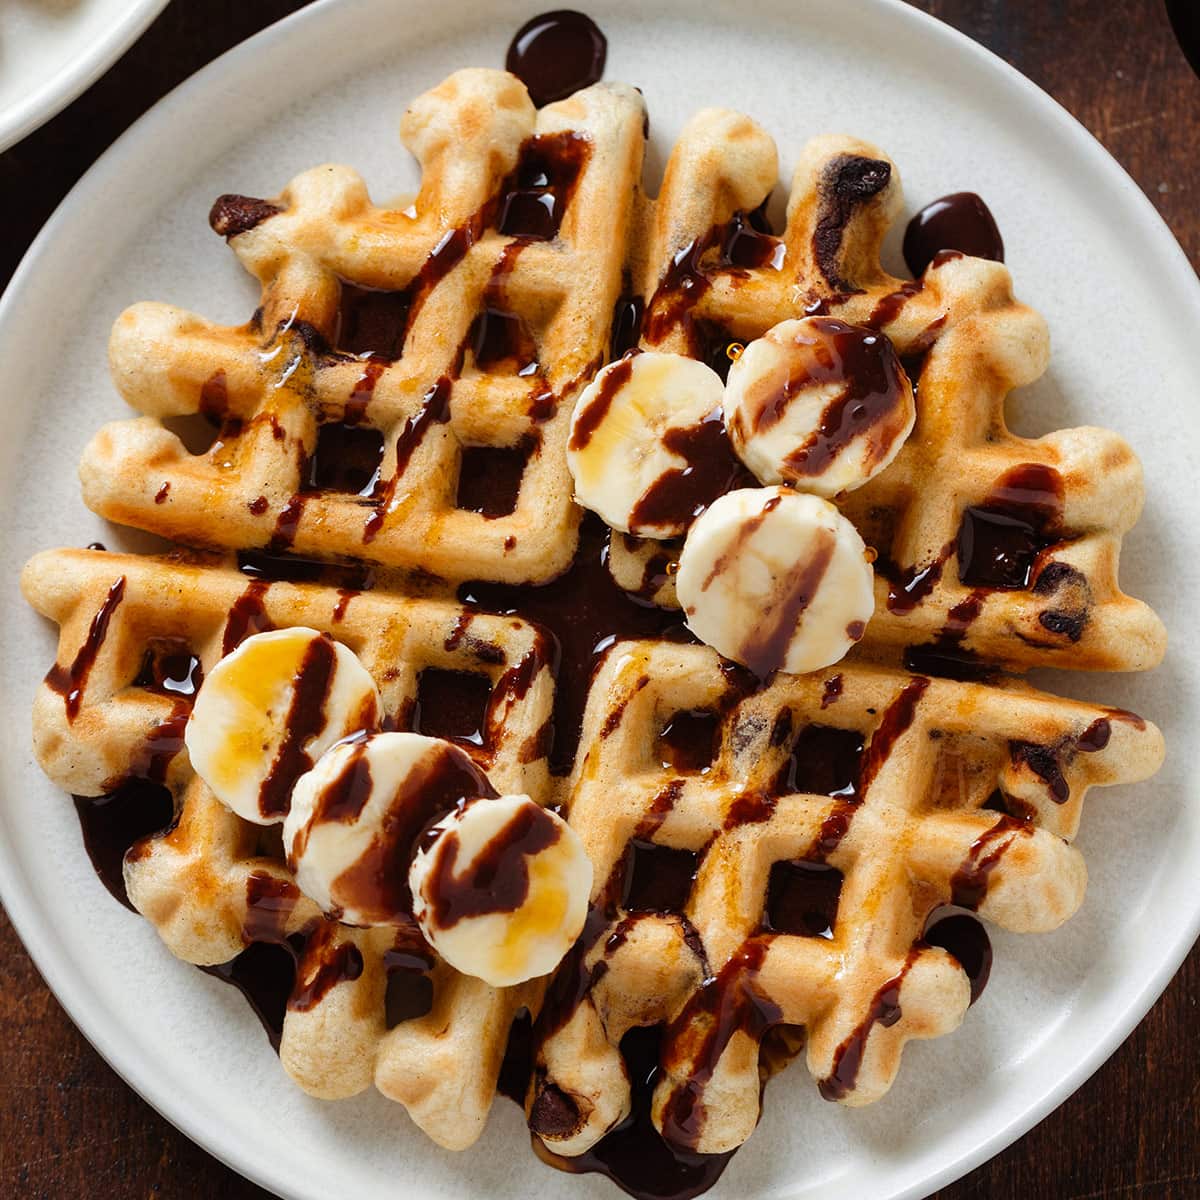 https://thehealthfulideas.com/wp-content/uploads/2023/09/Chocolate-Chip-Waffles-SQUARE.jpg